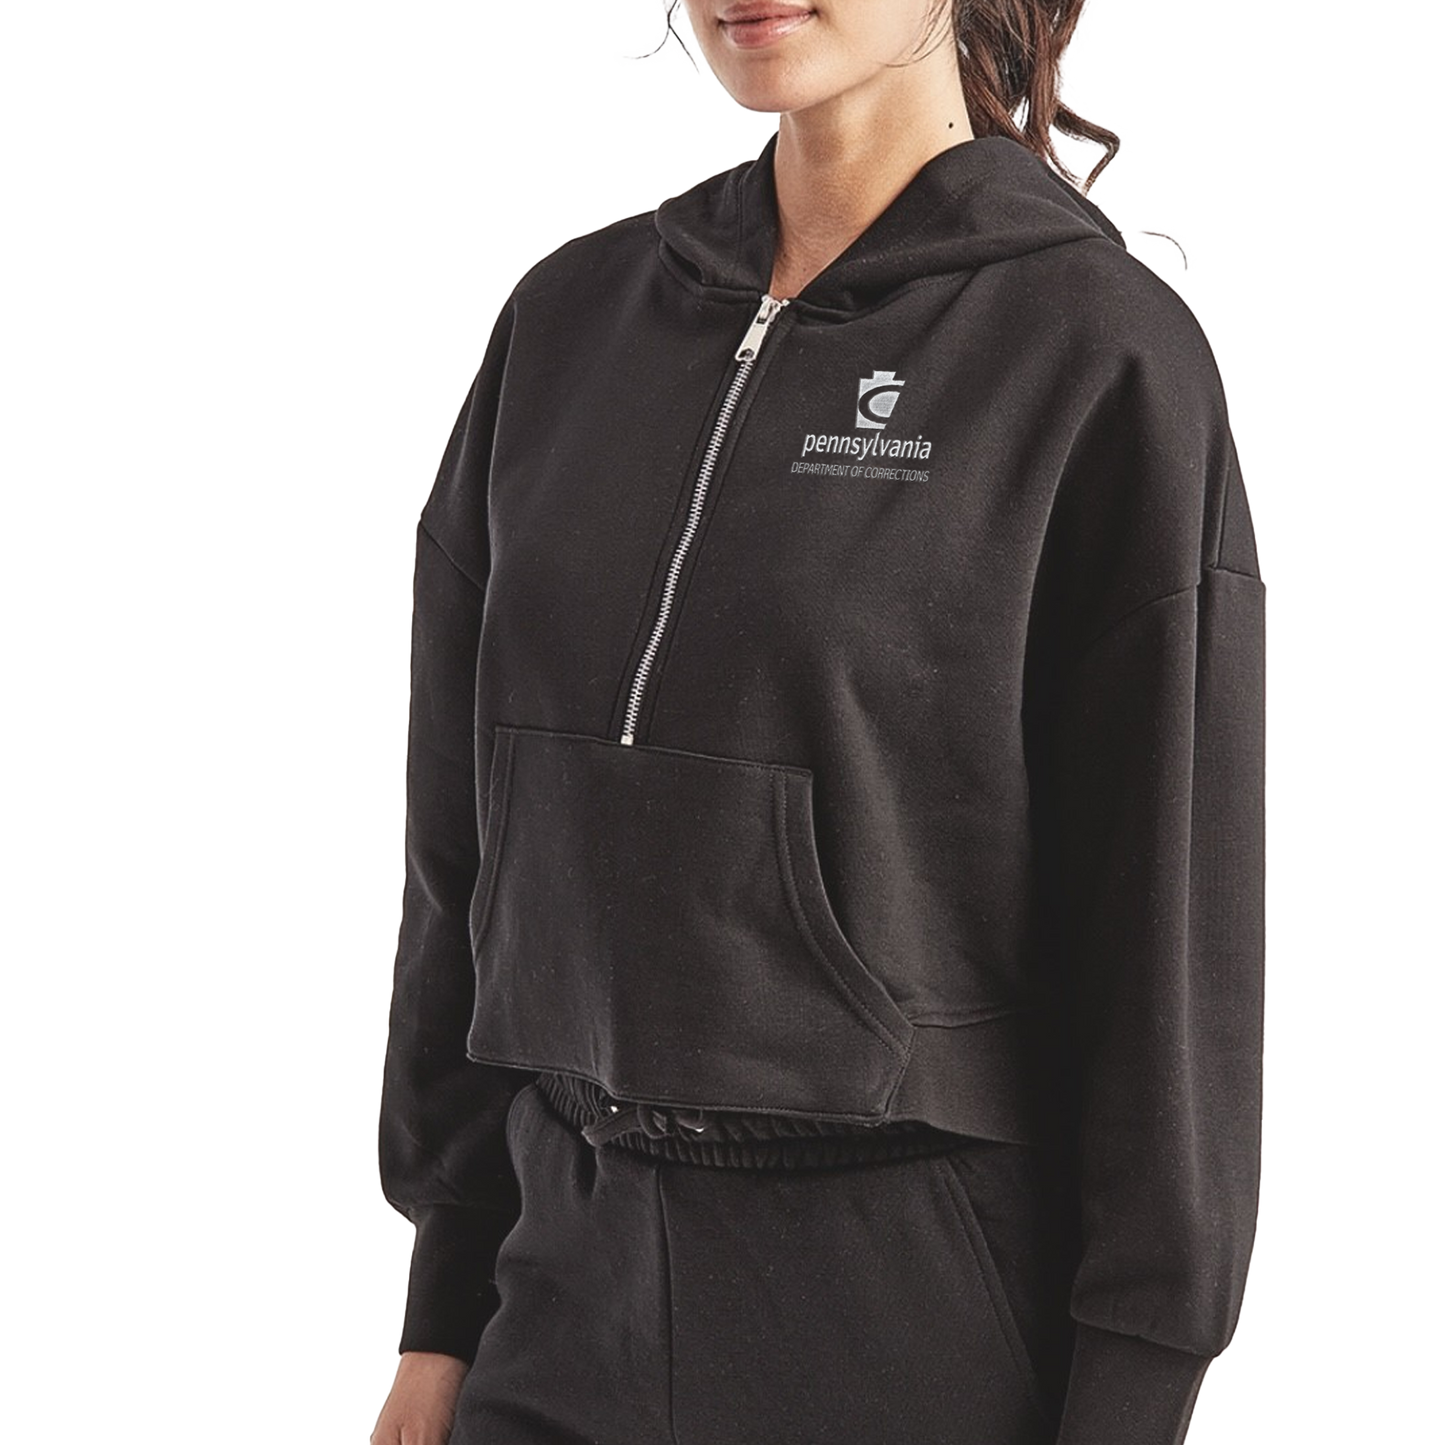 Ladies' Half-Zip Hooded Sweatshirt with Embroidered Department of Corrections Logos (Various Colors)